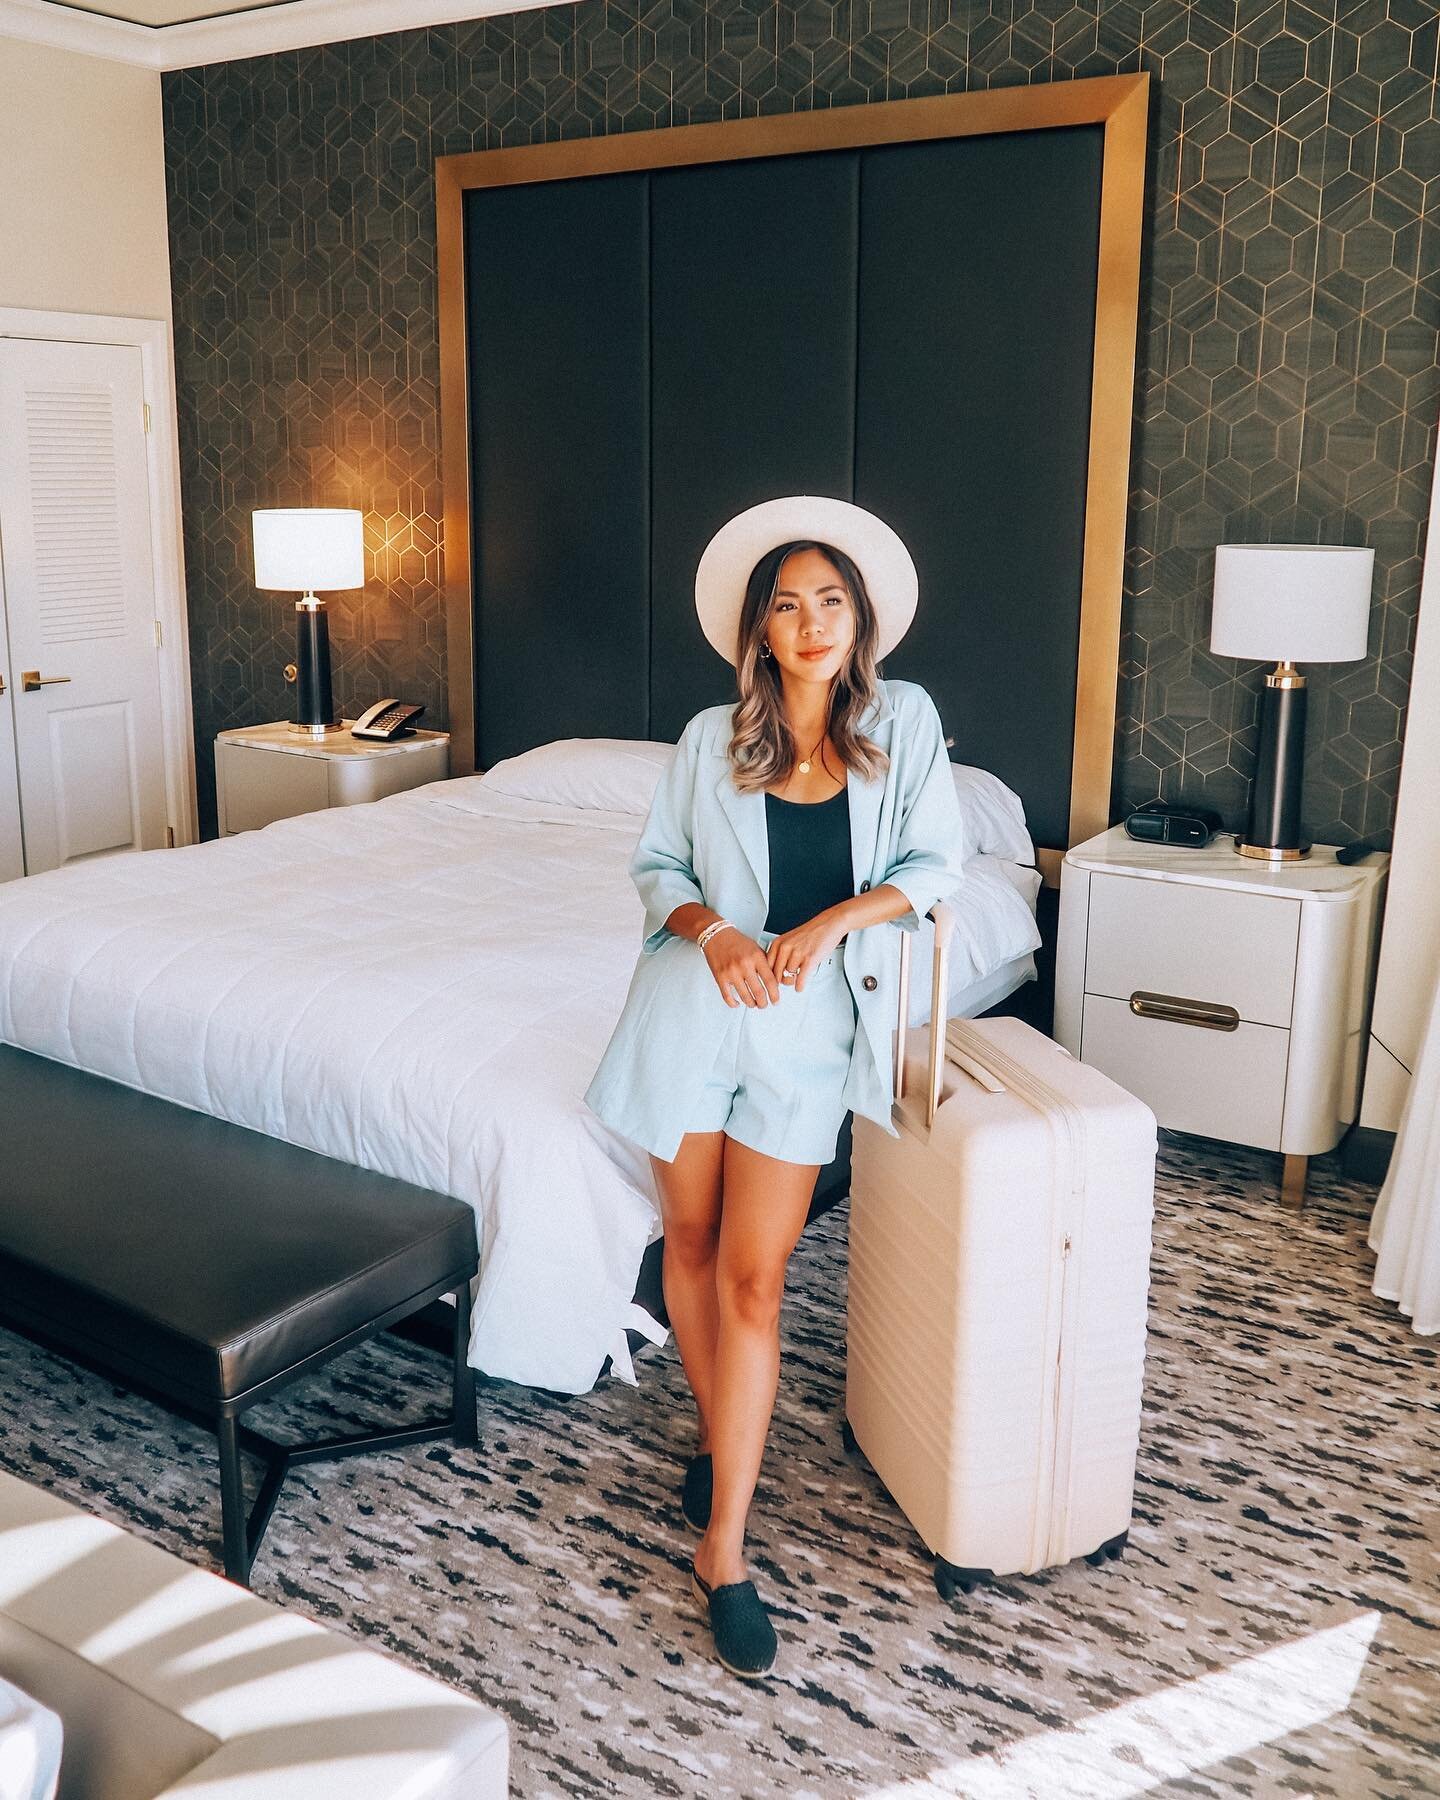 A relaxing and refreshing experience is just around the corner. ☺️💕 #StaCation 

I went on a little weekend getaway at @palacestation. The hotel recently remodeled their suites and they are absolutely gorgeous, and quite cozy!

I loved the spa-like 